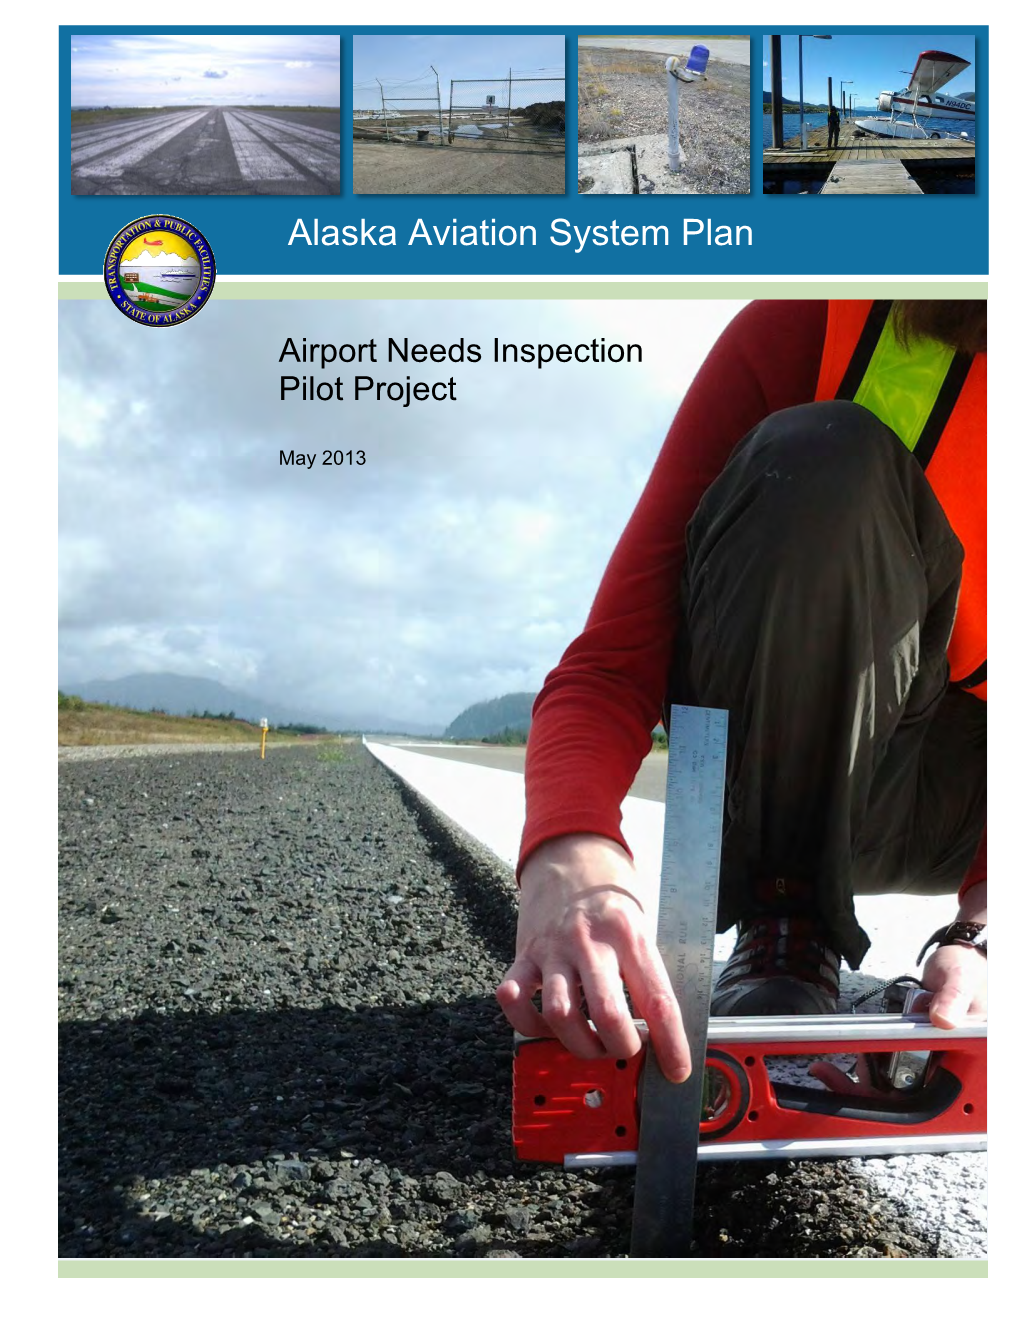 Airport Needs Inspection Pilot Project